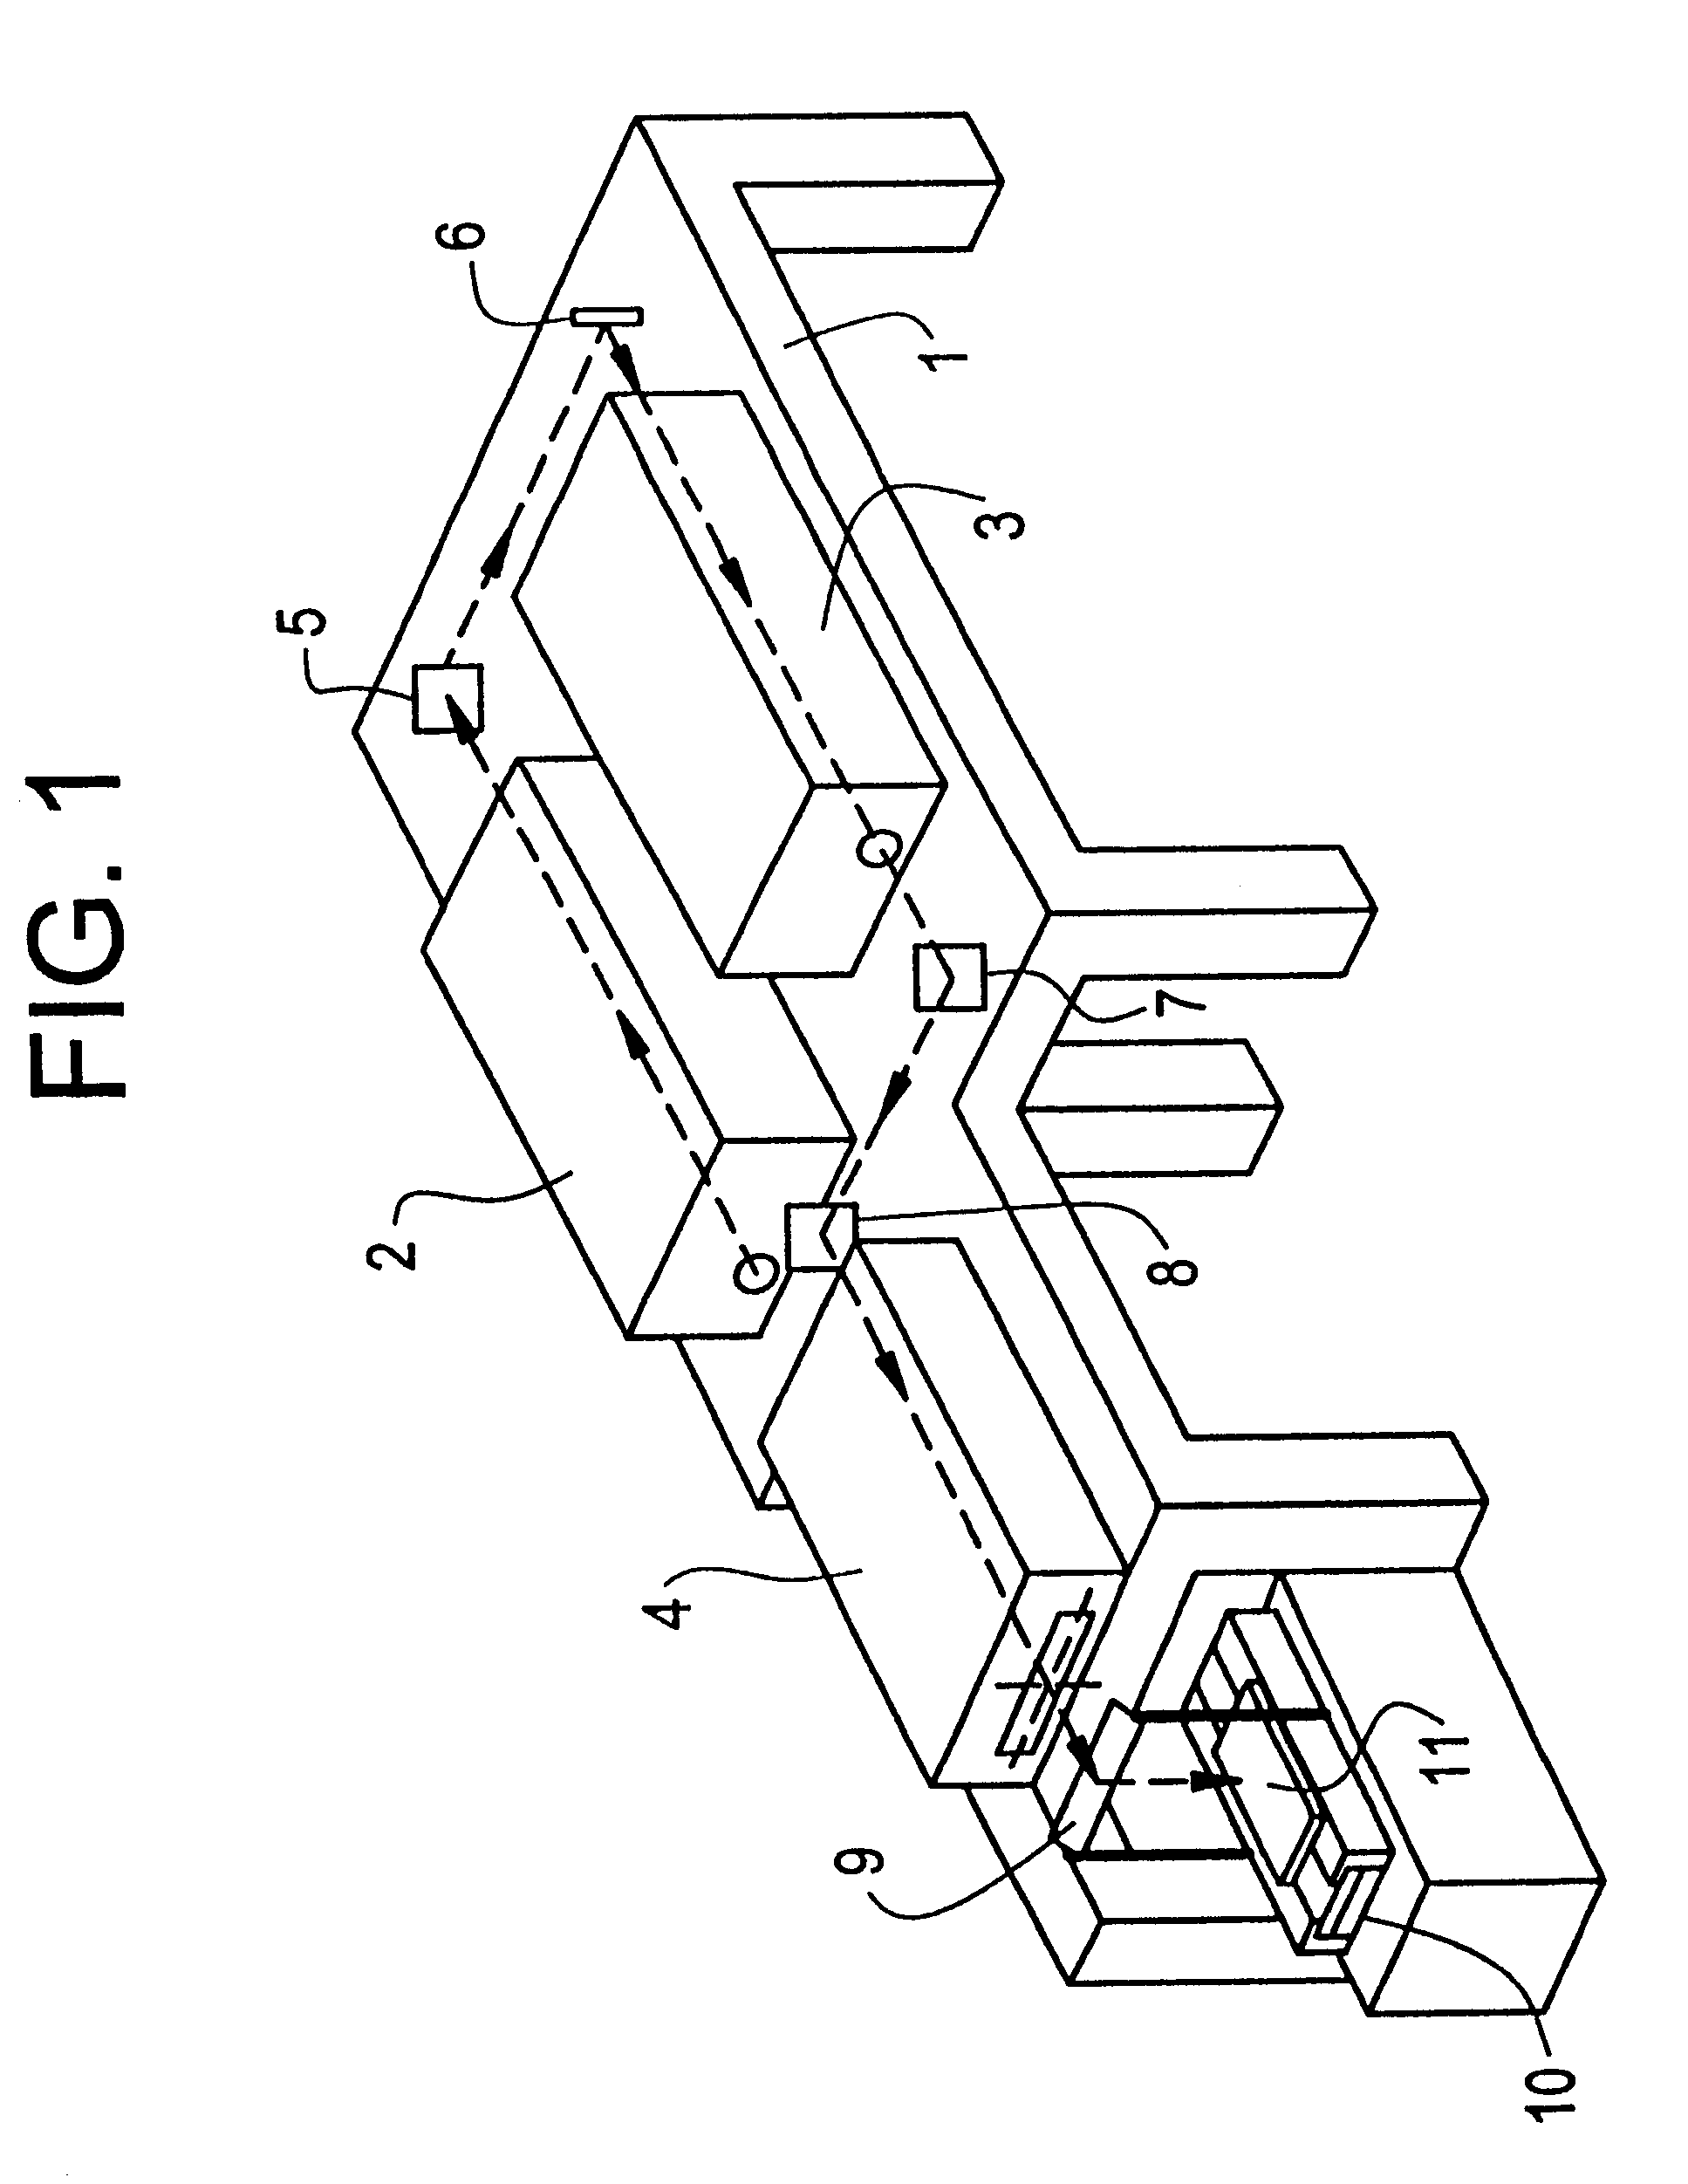 Method of manufacturing a semiconductor device utilizing a laser annealing process